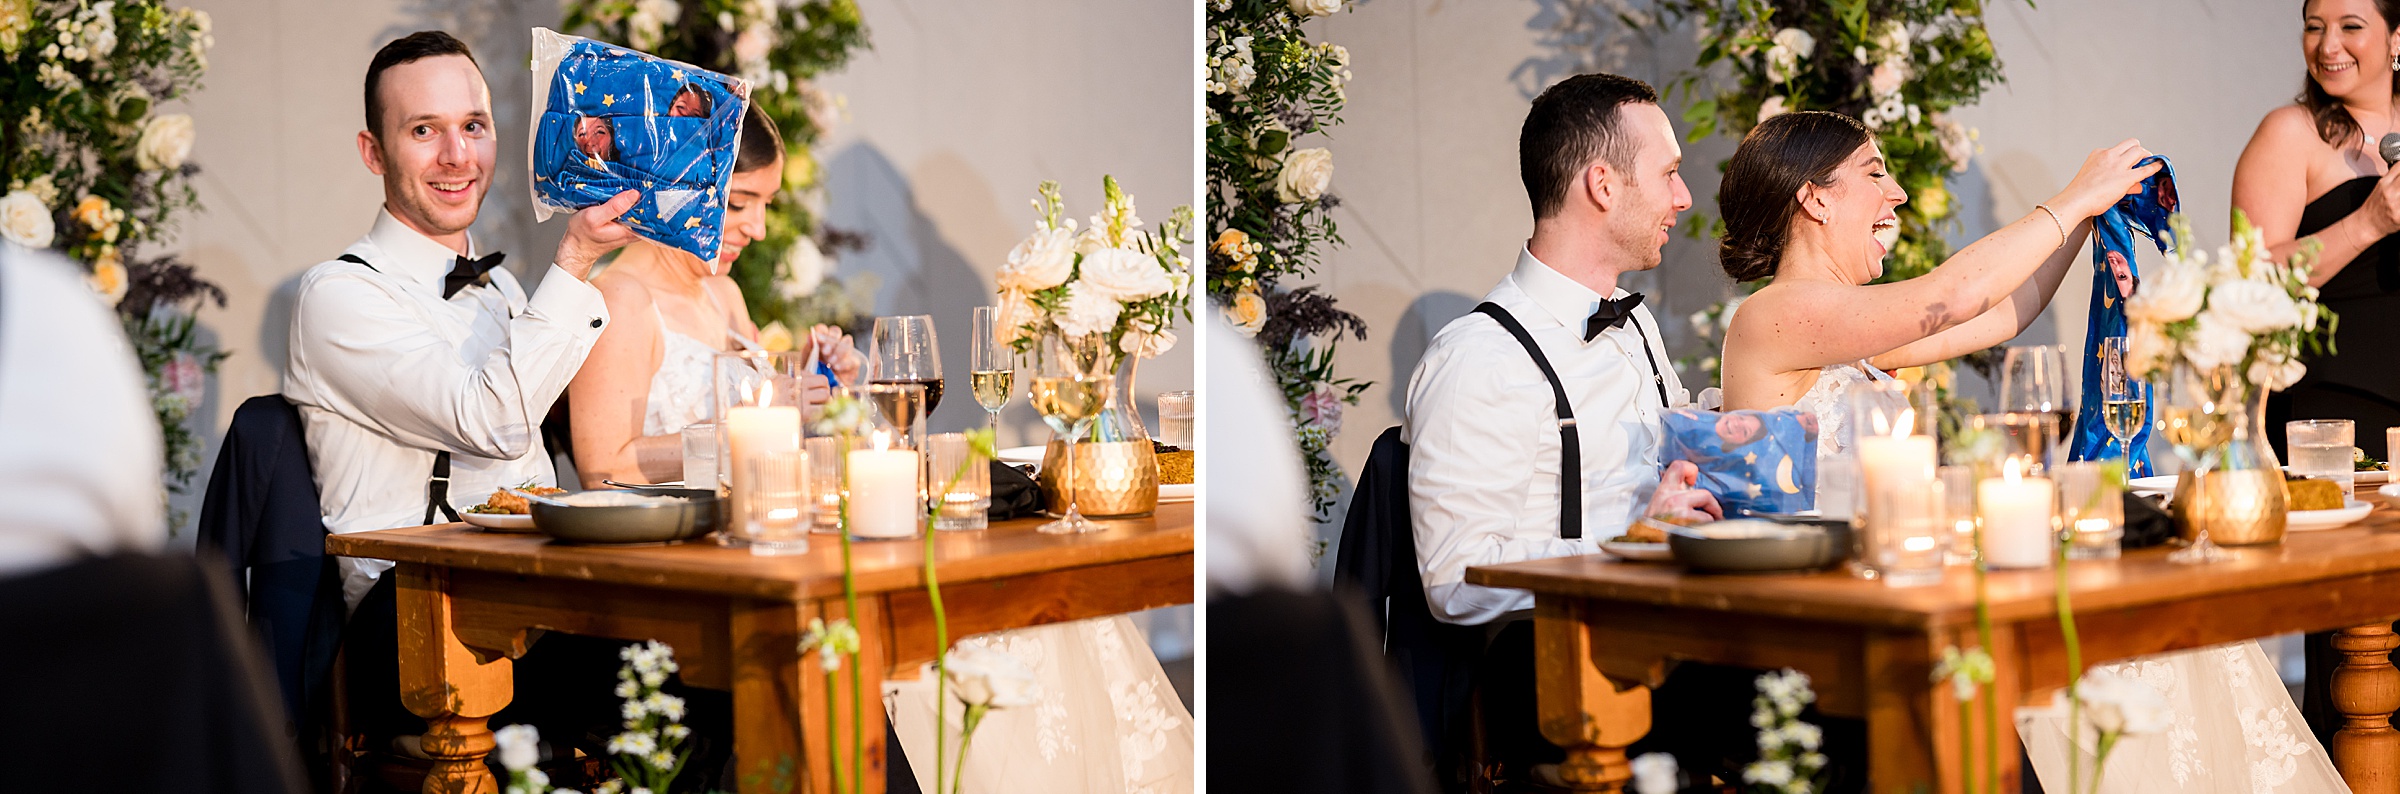 Two pictures of a bride and groom at their Lilah Events wedding reception.